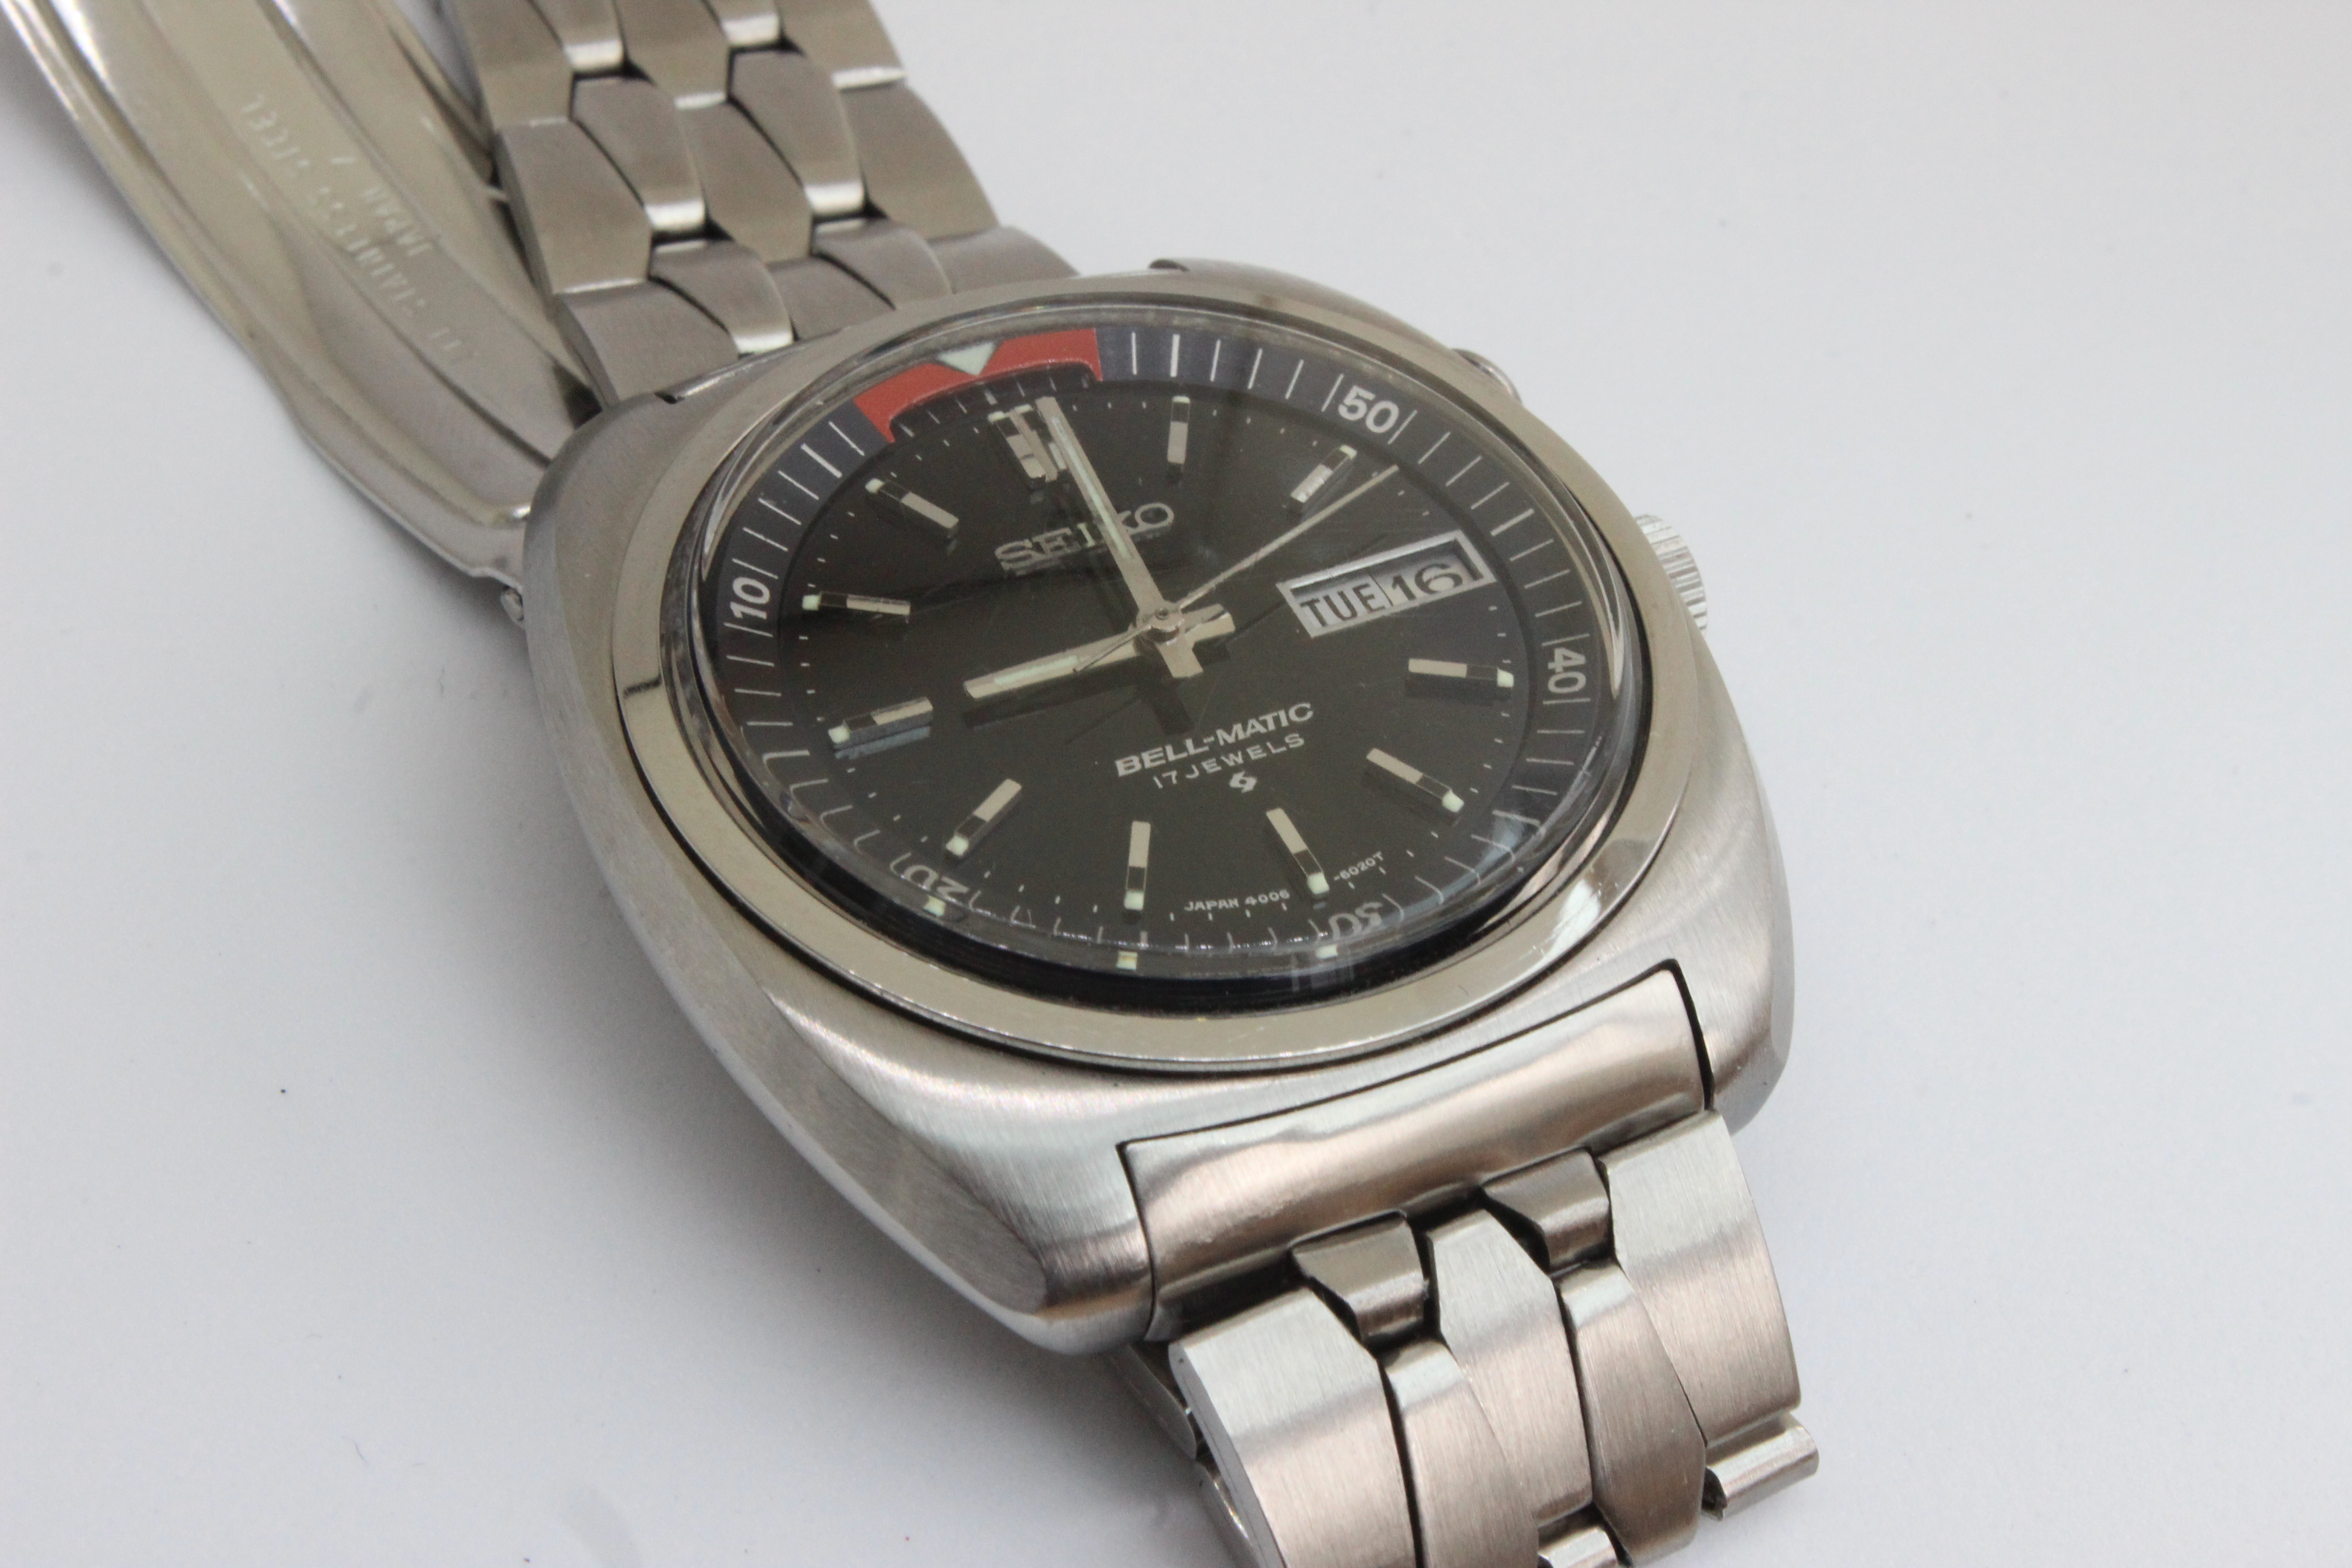 SOLD - Seiko 4006-6031 Bell-Matic full set | Omega Forums